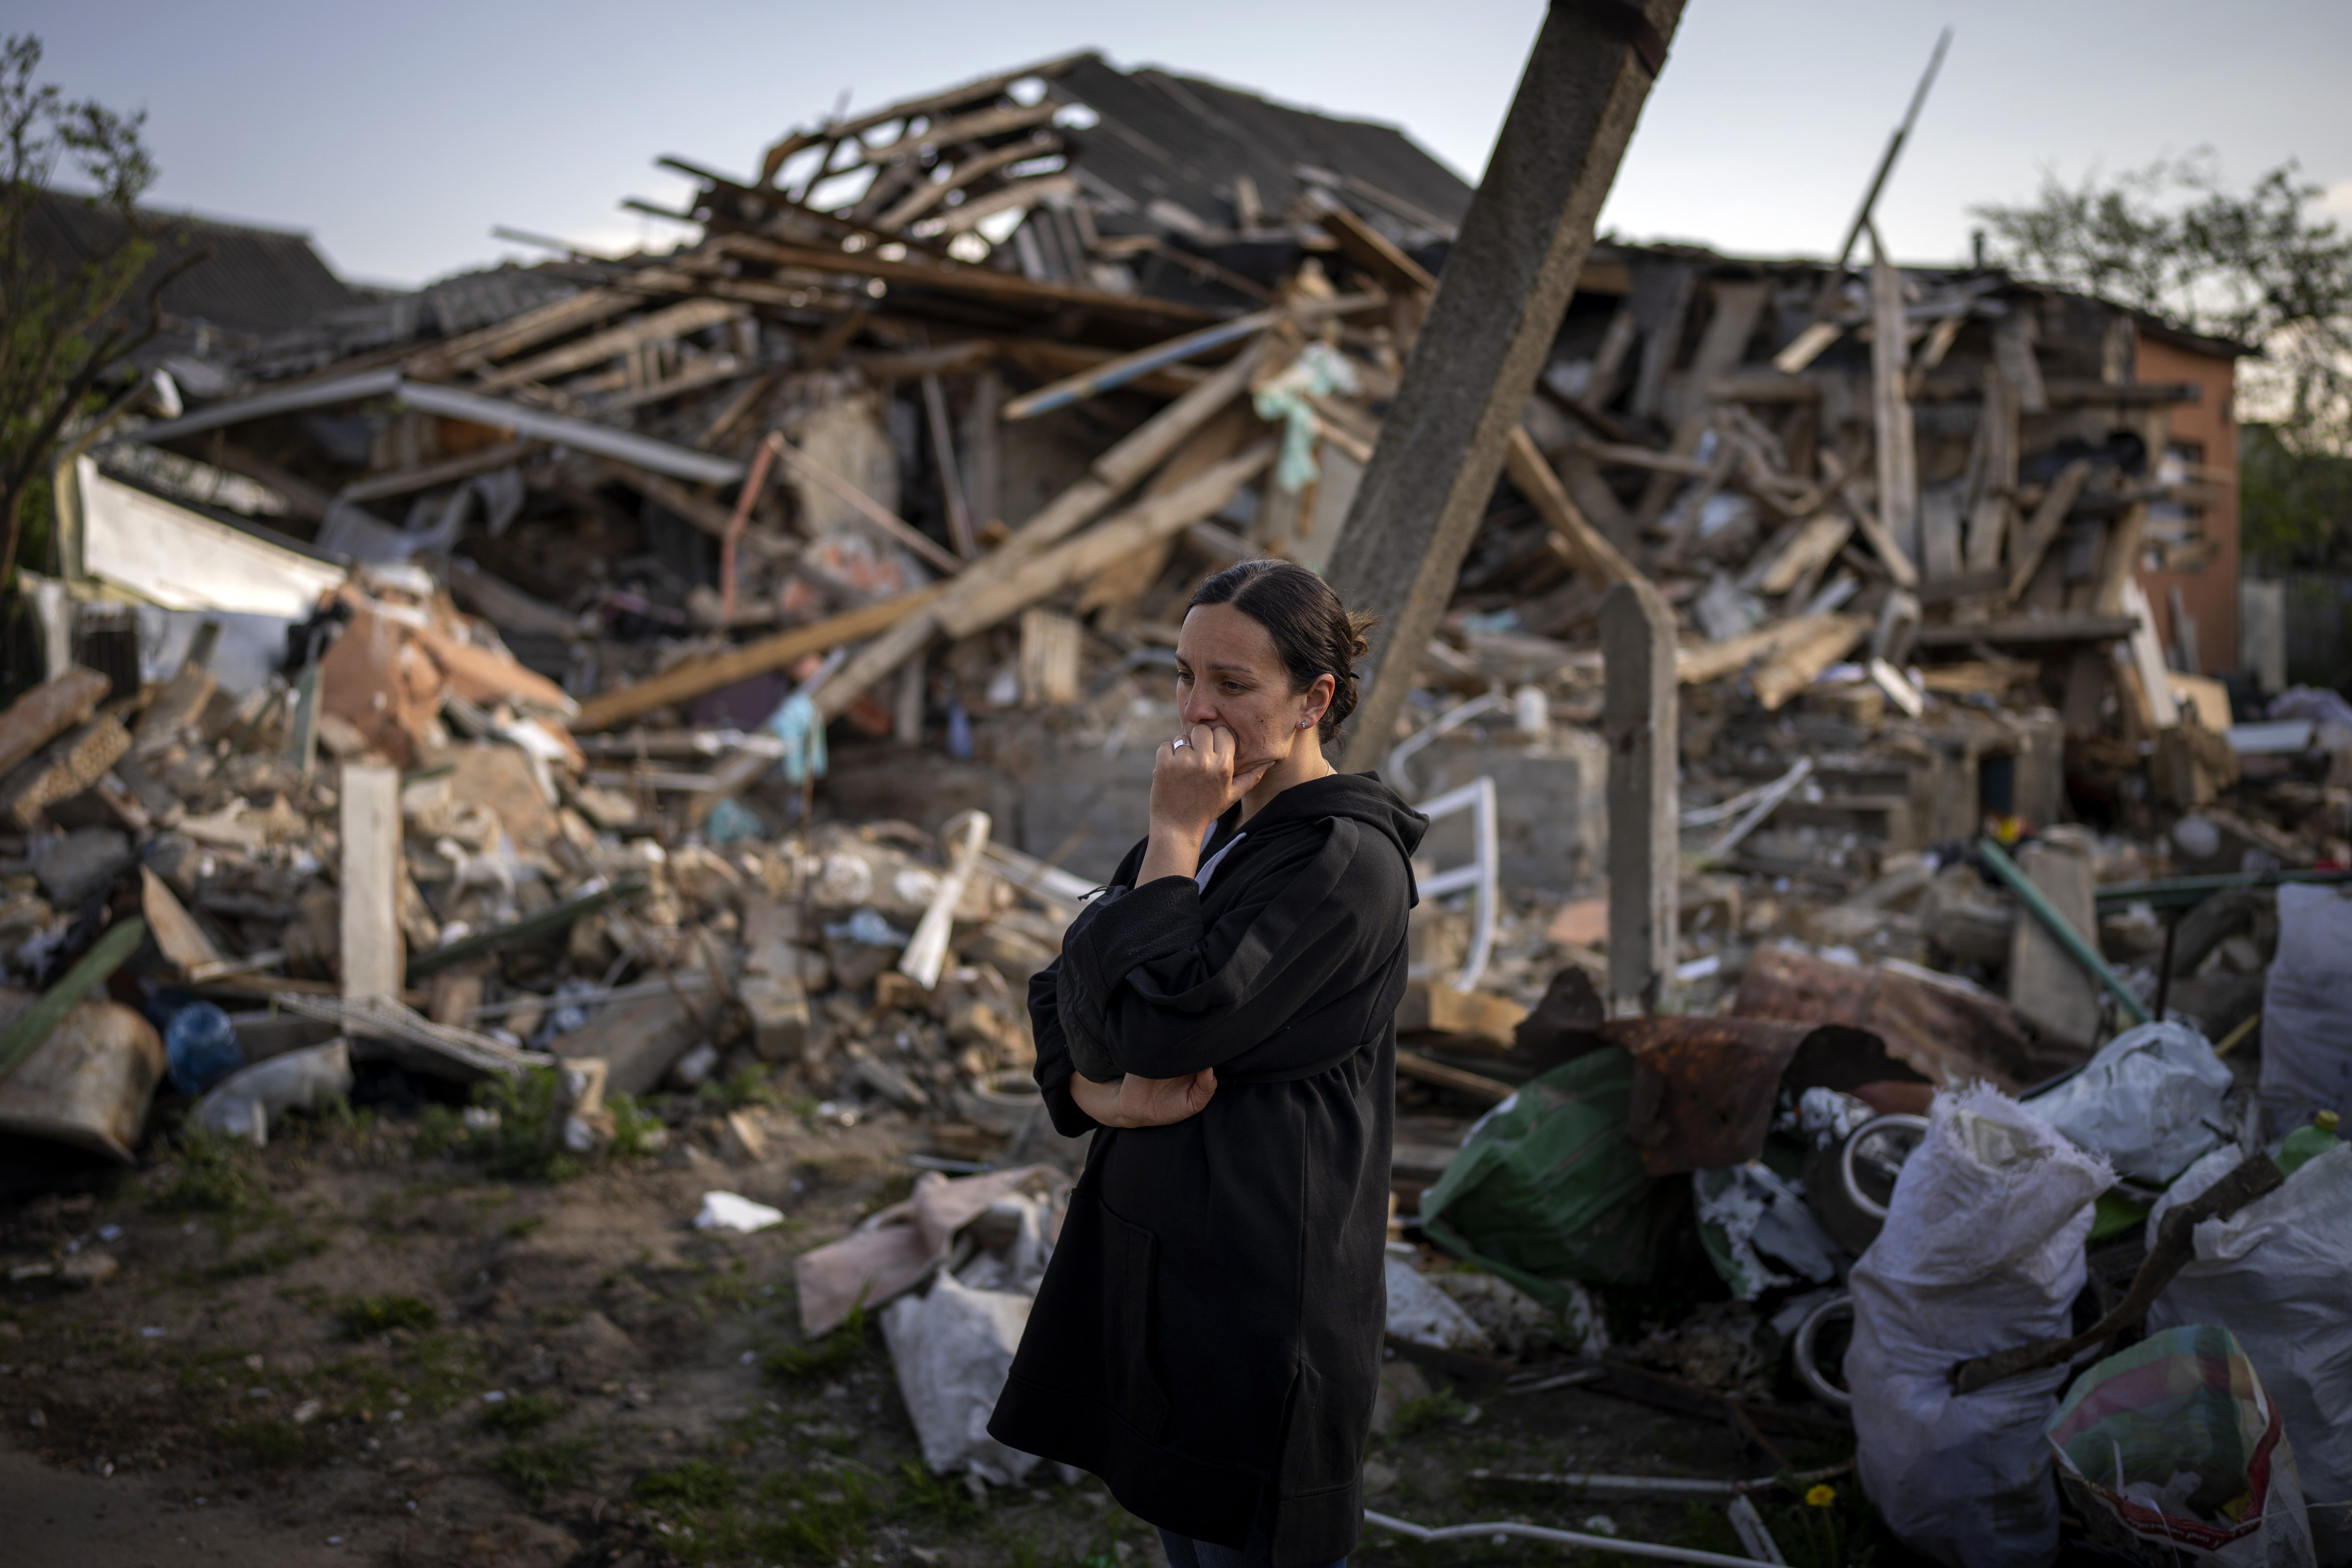 Anna Shevchenko, 35, reacts next to her home in Irpin, near Kyiv, Tuesday, May 3, 2022. The house, built by Shevchenko's grandparents, was nearly completely destroyed by bombing in late March during the Russian invasion of Ukraine. 